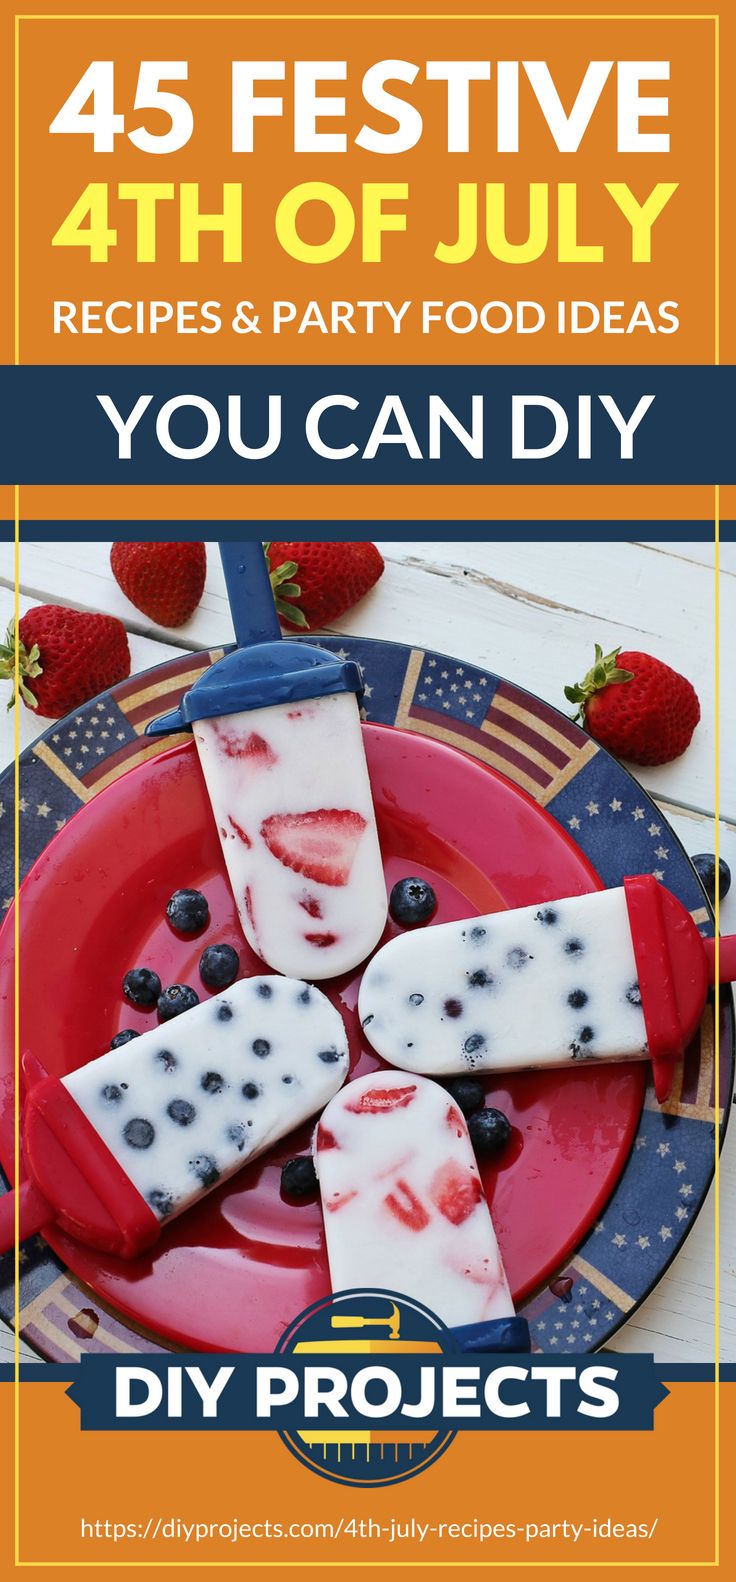 Festive 4th Of July Recipes And Party Food Ideas You Can DIY | https://diyprojects.com/4th-july-recipes-party-ideas/